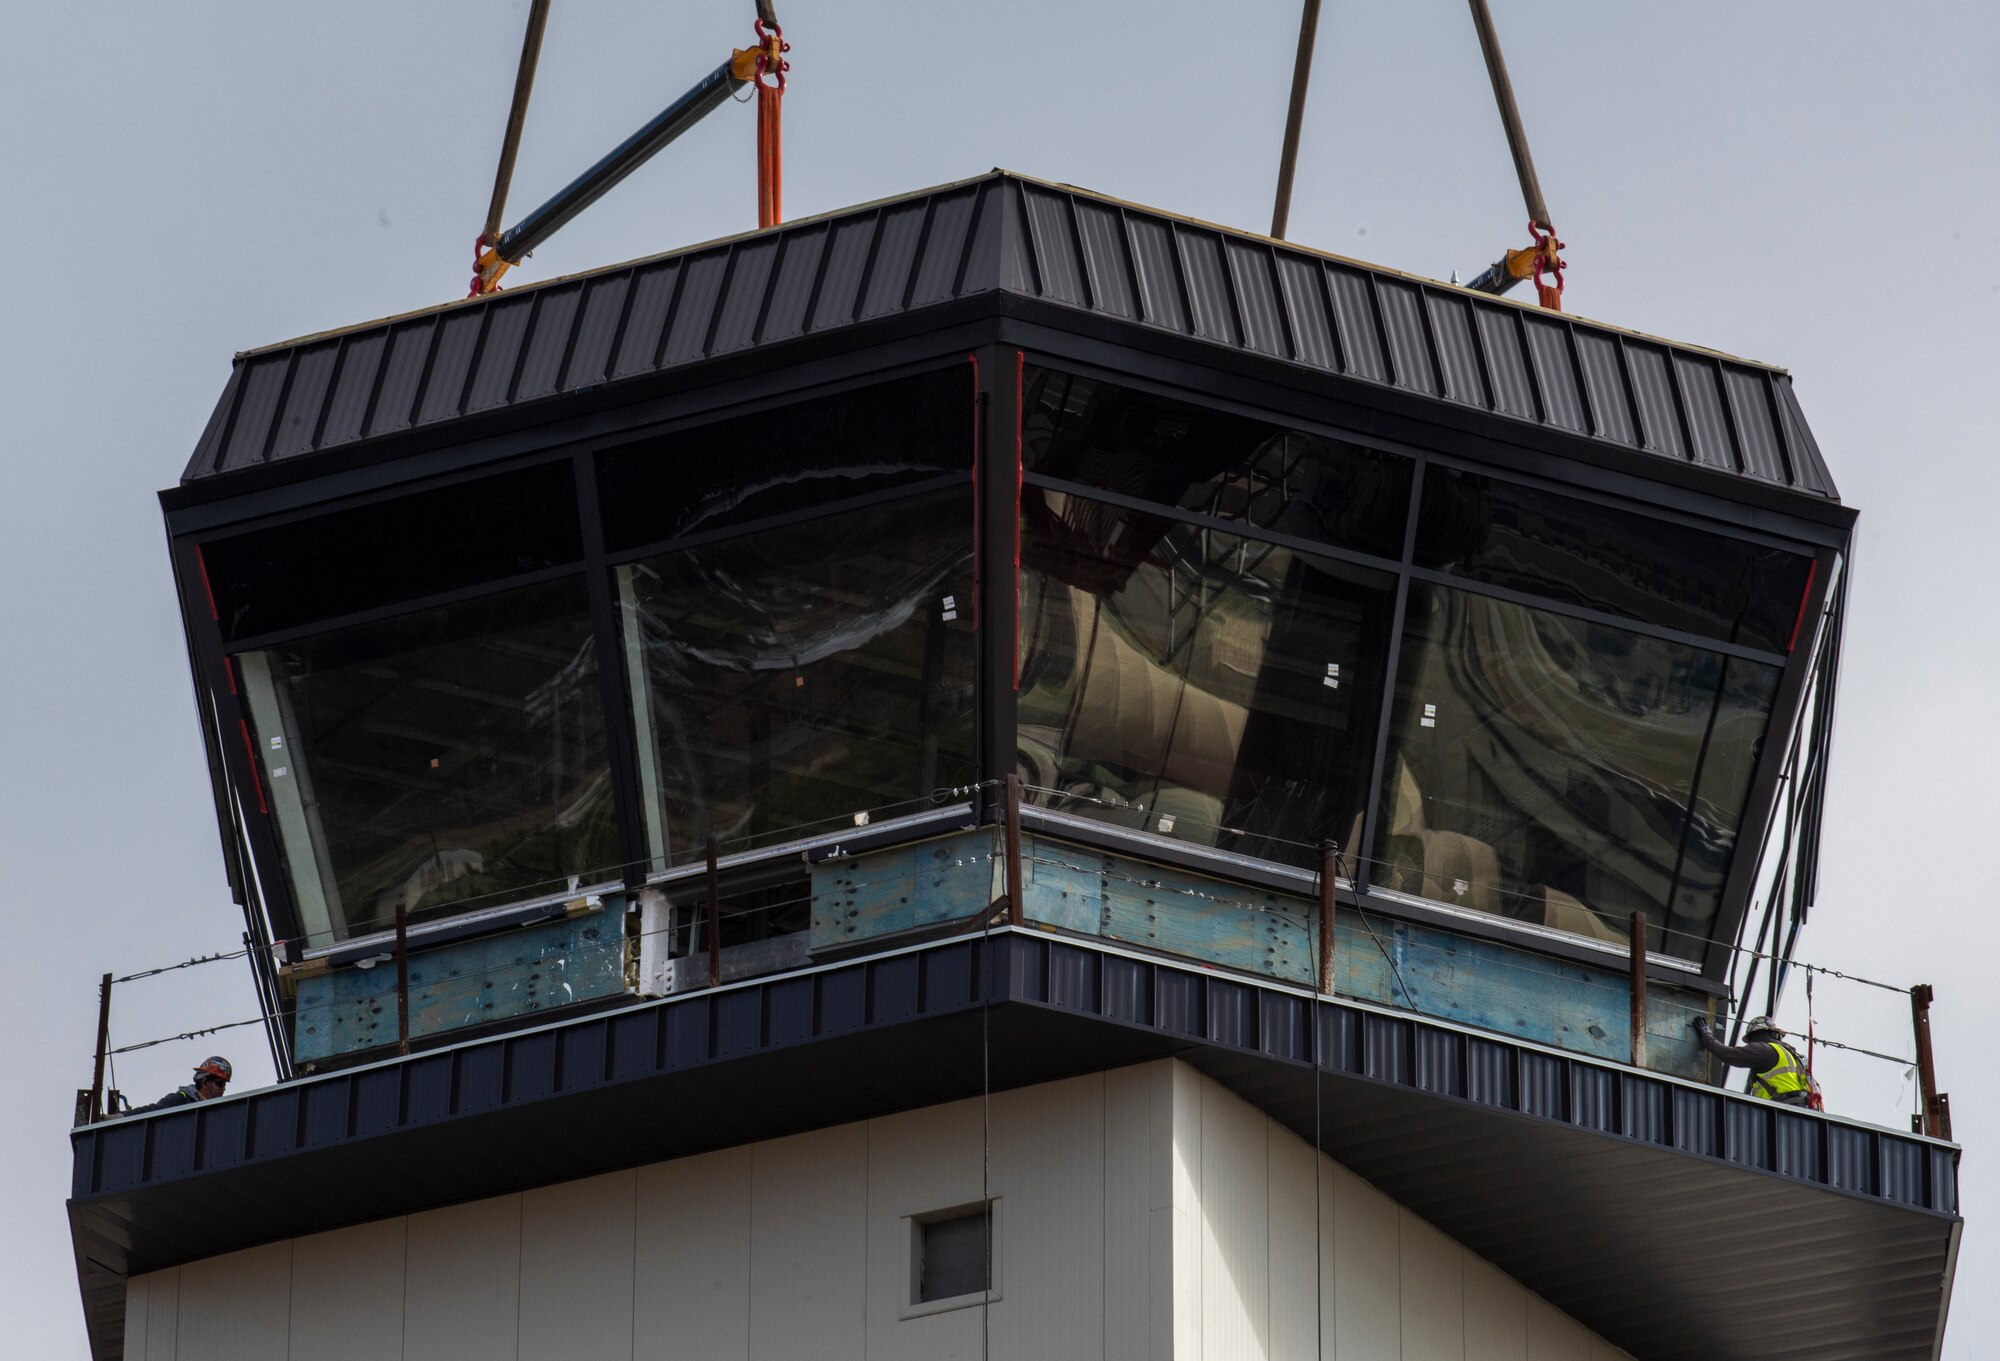 The control cab is positioned on top of the new air traffic control tower at Seymour Johnson Air Force Base, North Carolina.